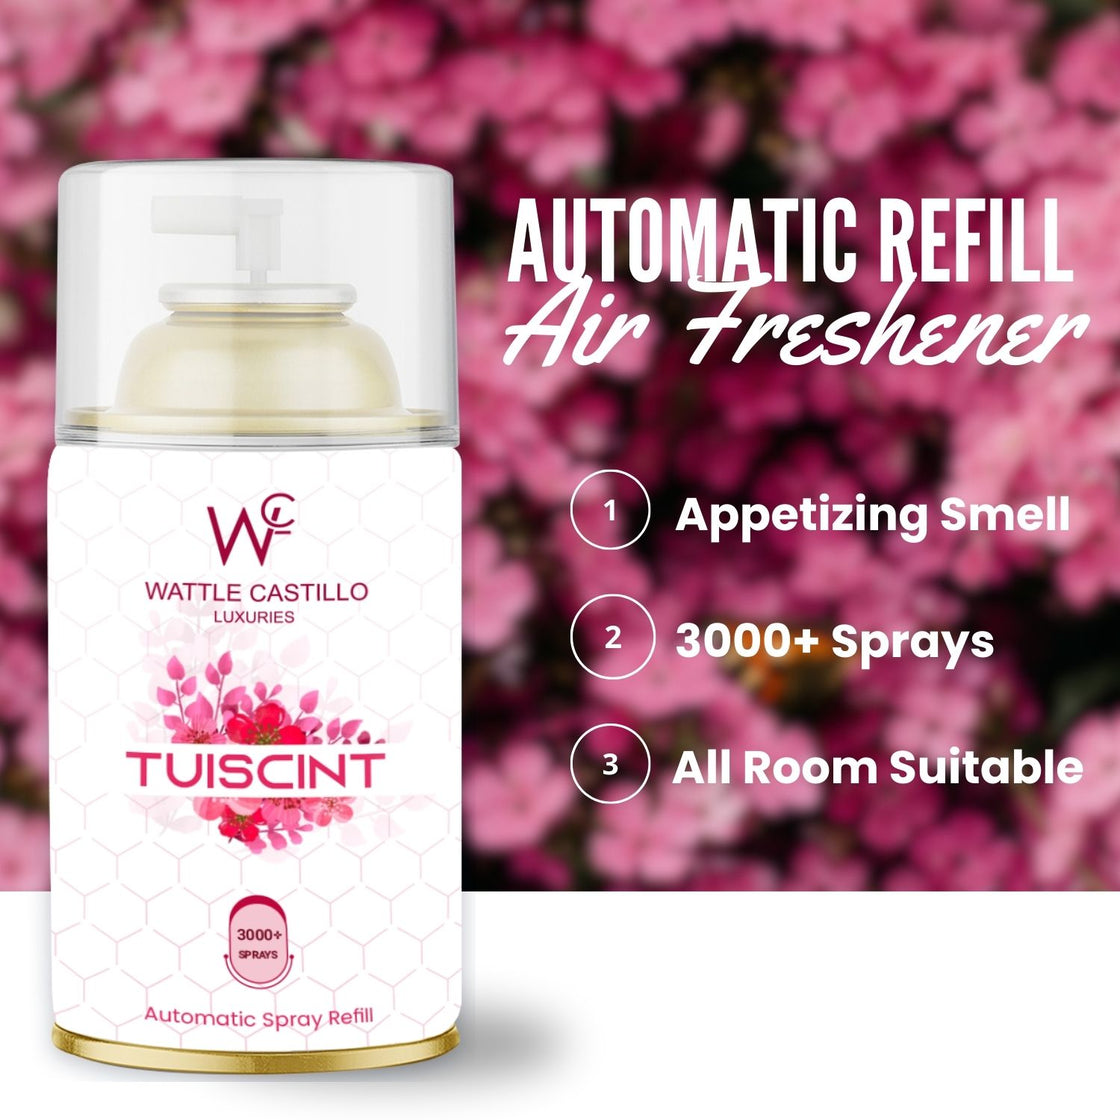 Wattle Castillo Tuiscint Automatic Room Fresheners Refill (265ml) & 3000+ Sprays Guaranteed Lasts up to 80 days